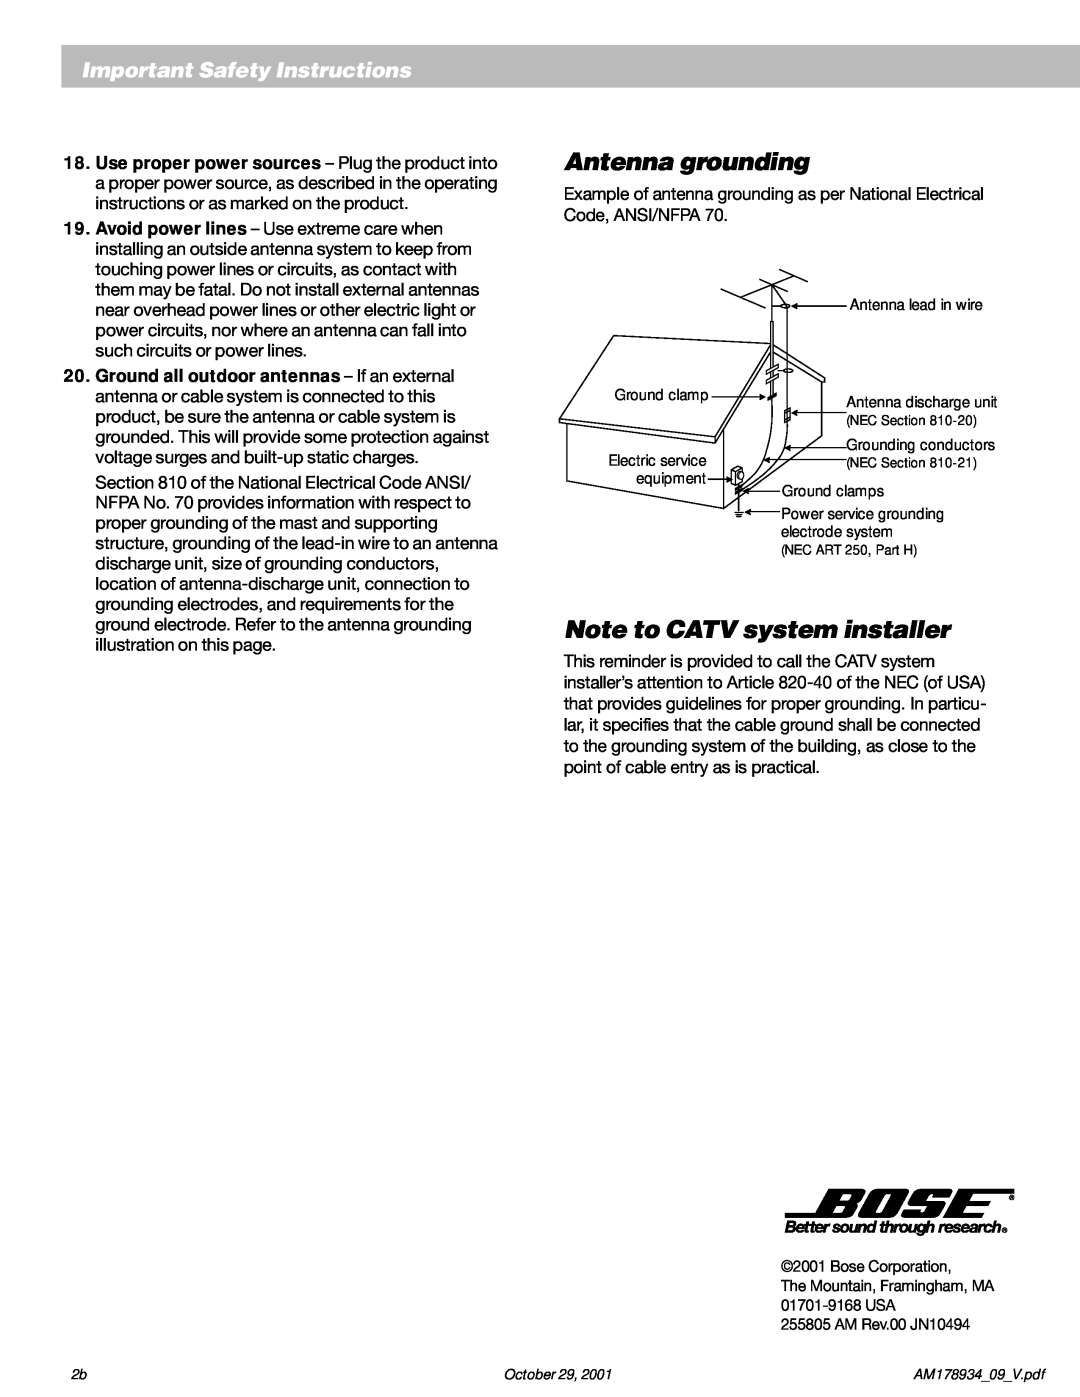 Bose 20 manual Antenna grounding, Note to CATV system installer, Important Safety Instructions, Antenna lead in wire 